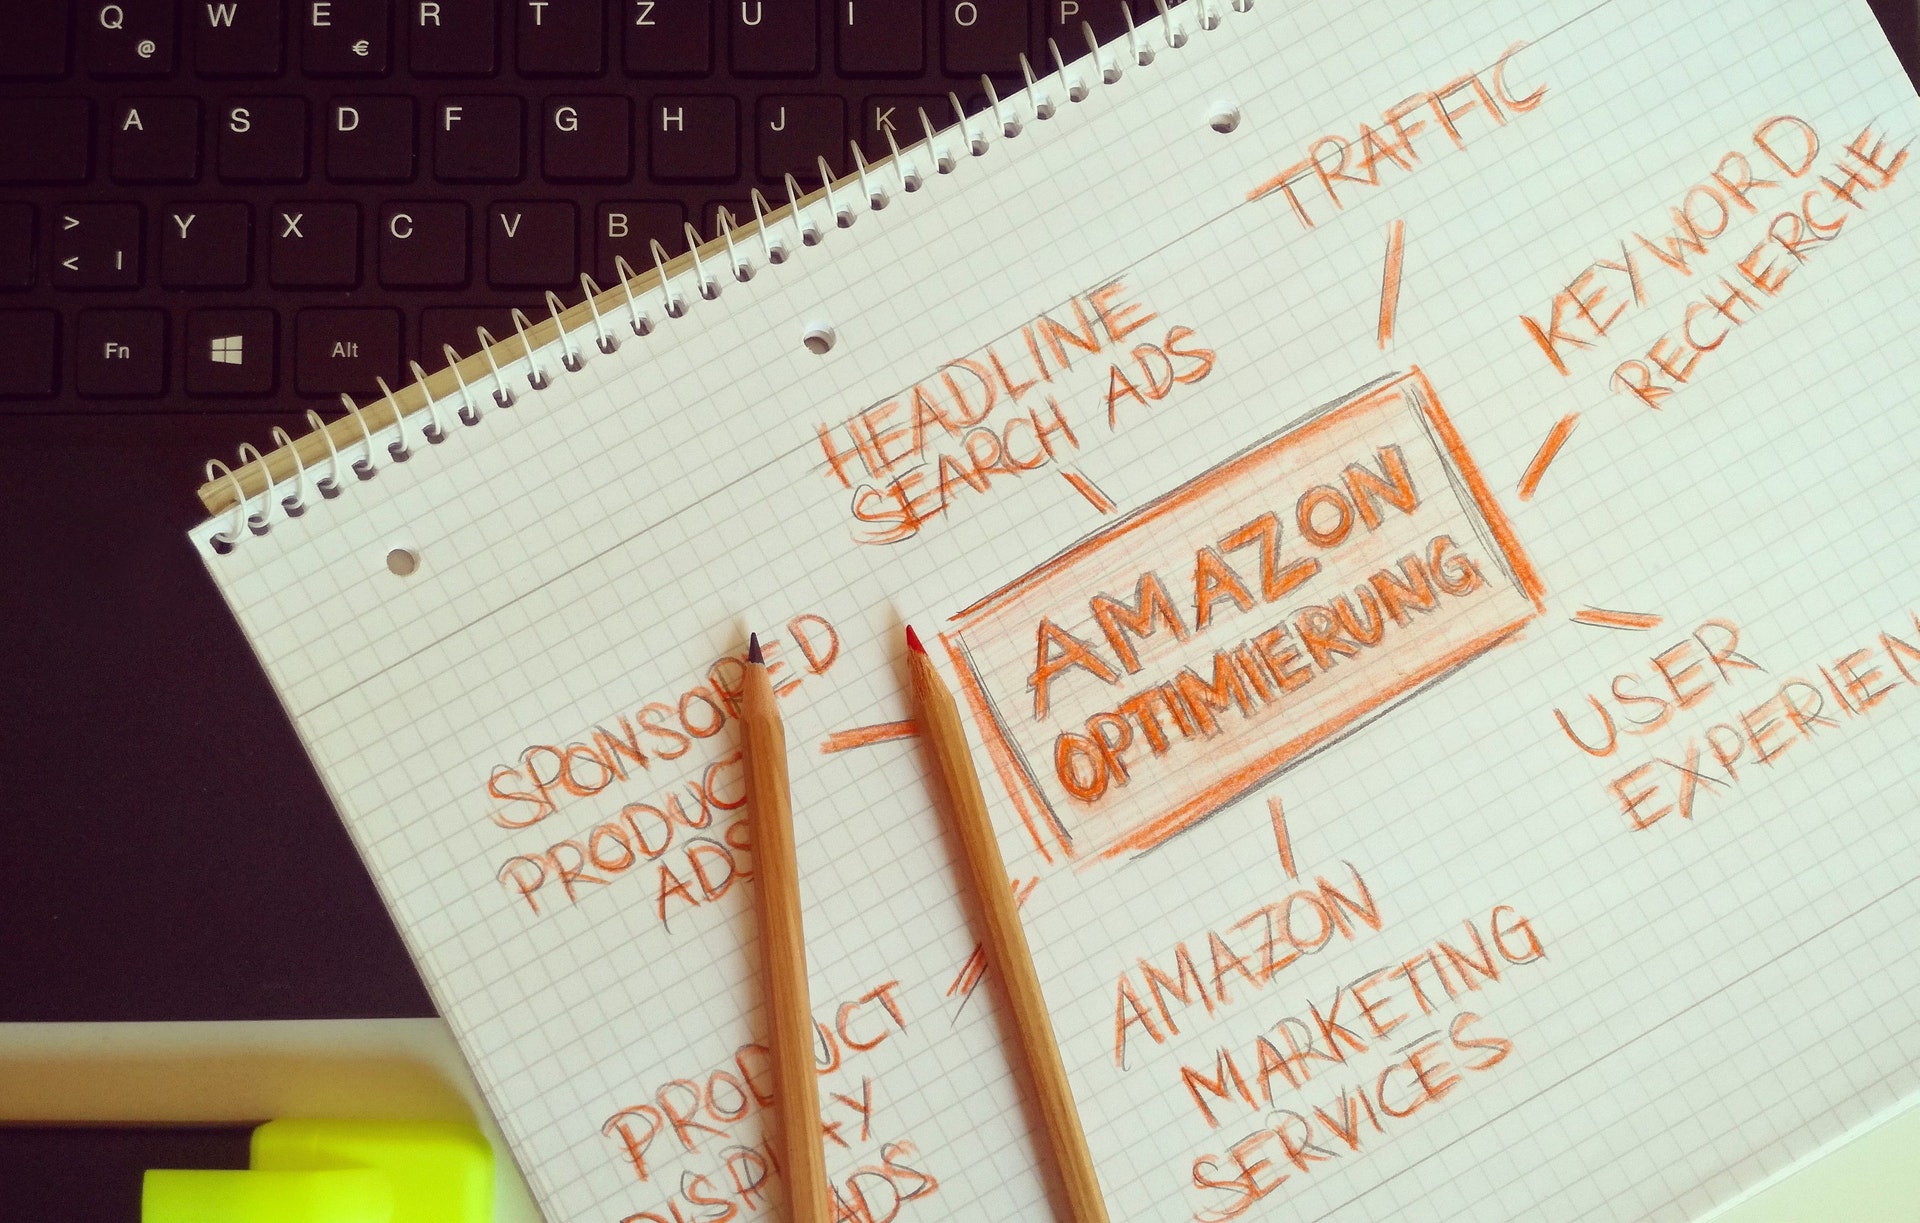 What We Can Learn About Web Design From Amazon